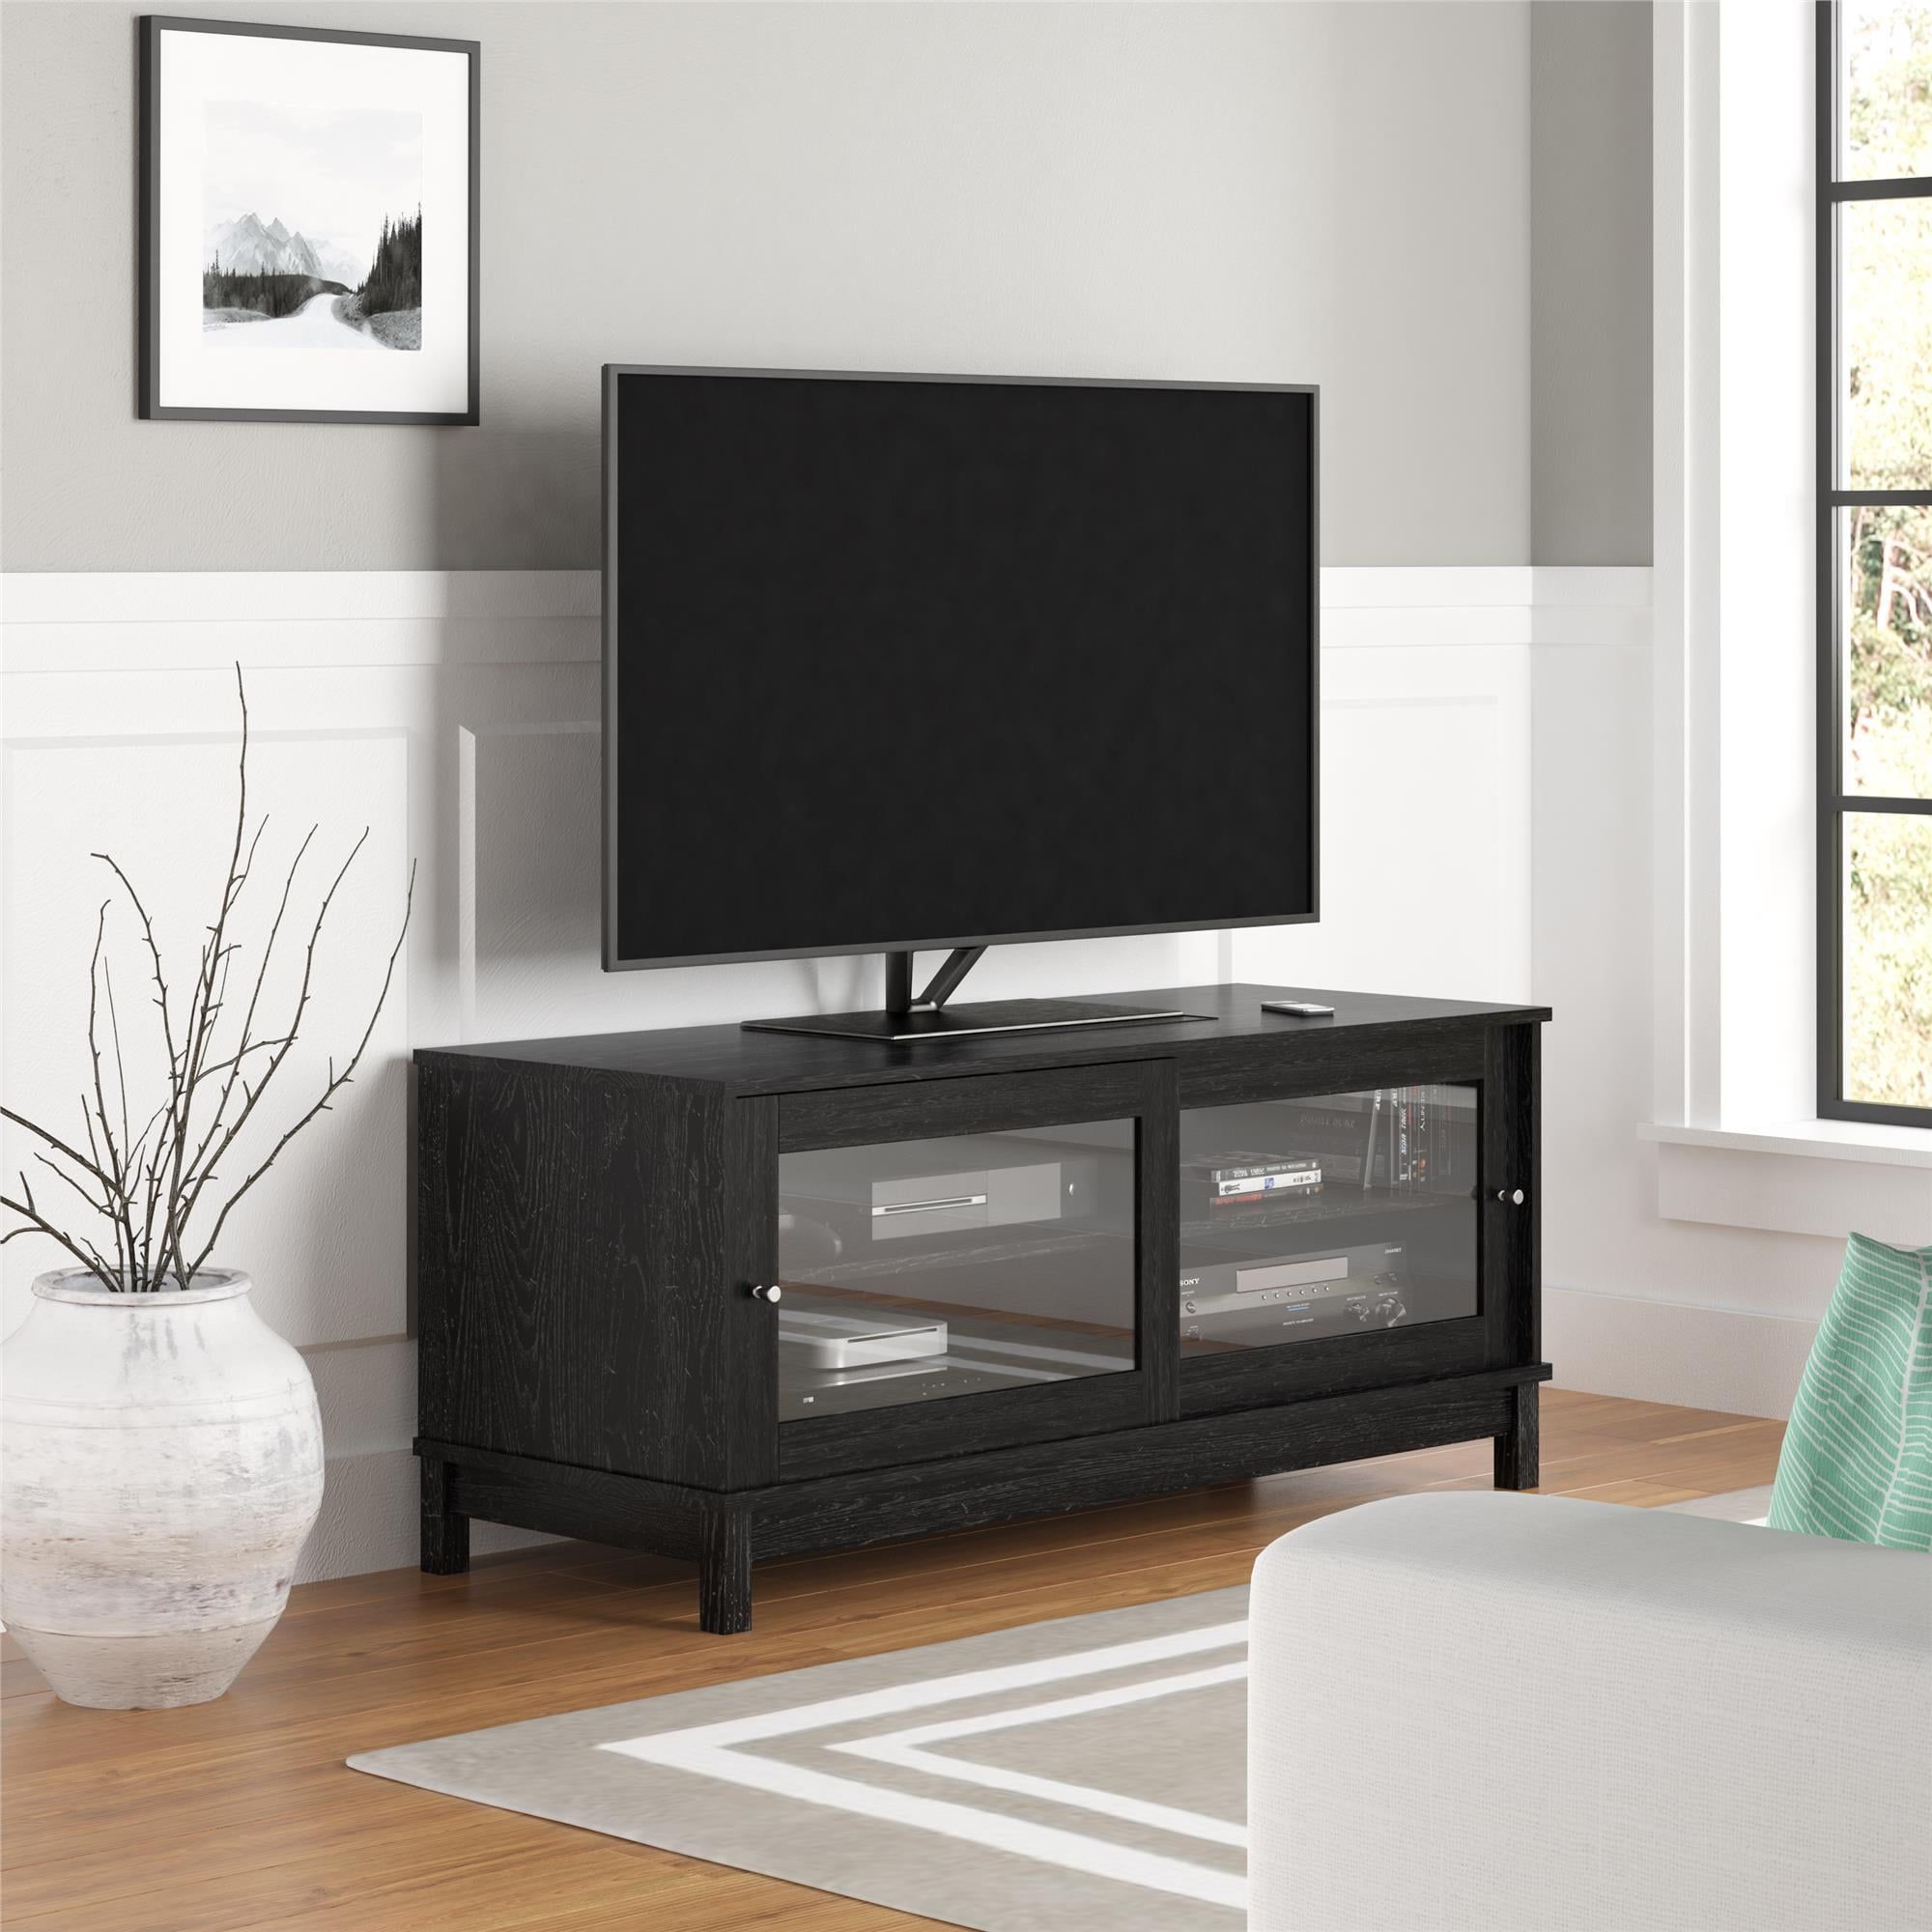 Mainstays Tv Stand For Tvs Up To 55", Multiple Finishes – Black In Dual Use Storage Cabinet Tv Stands (Gallery 10 of 20)